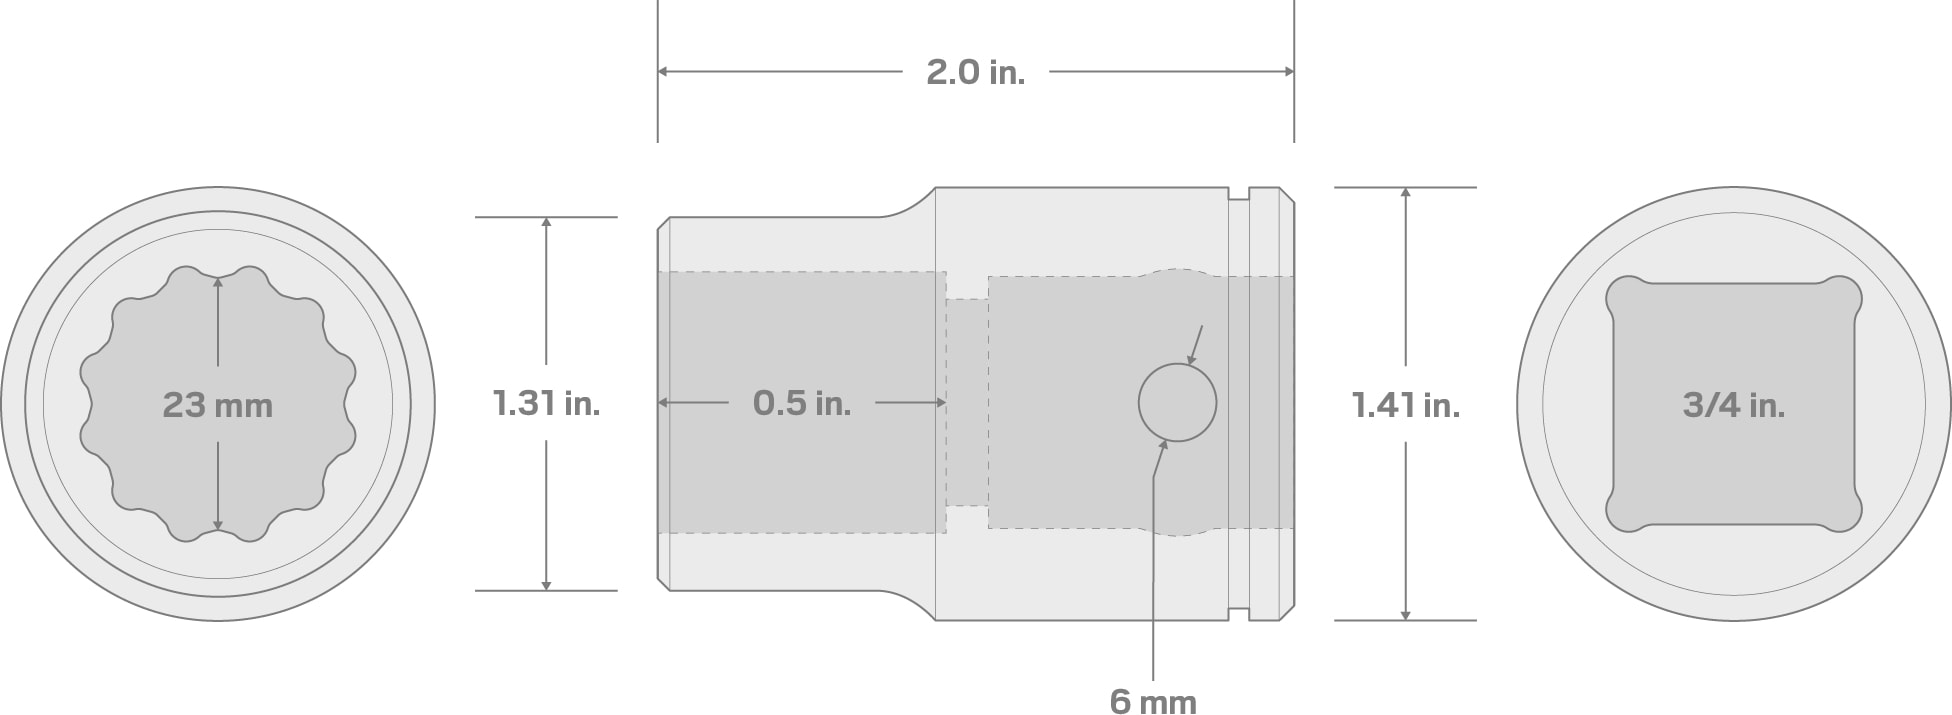 Specs for 3/4 Inch Drive x 23 mm 12-Point Socket